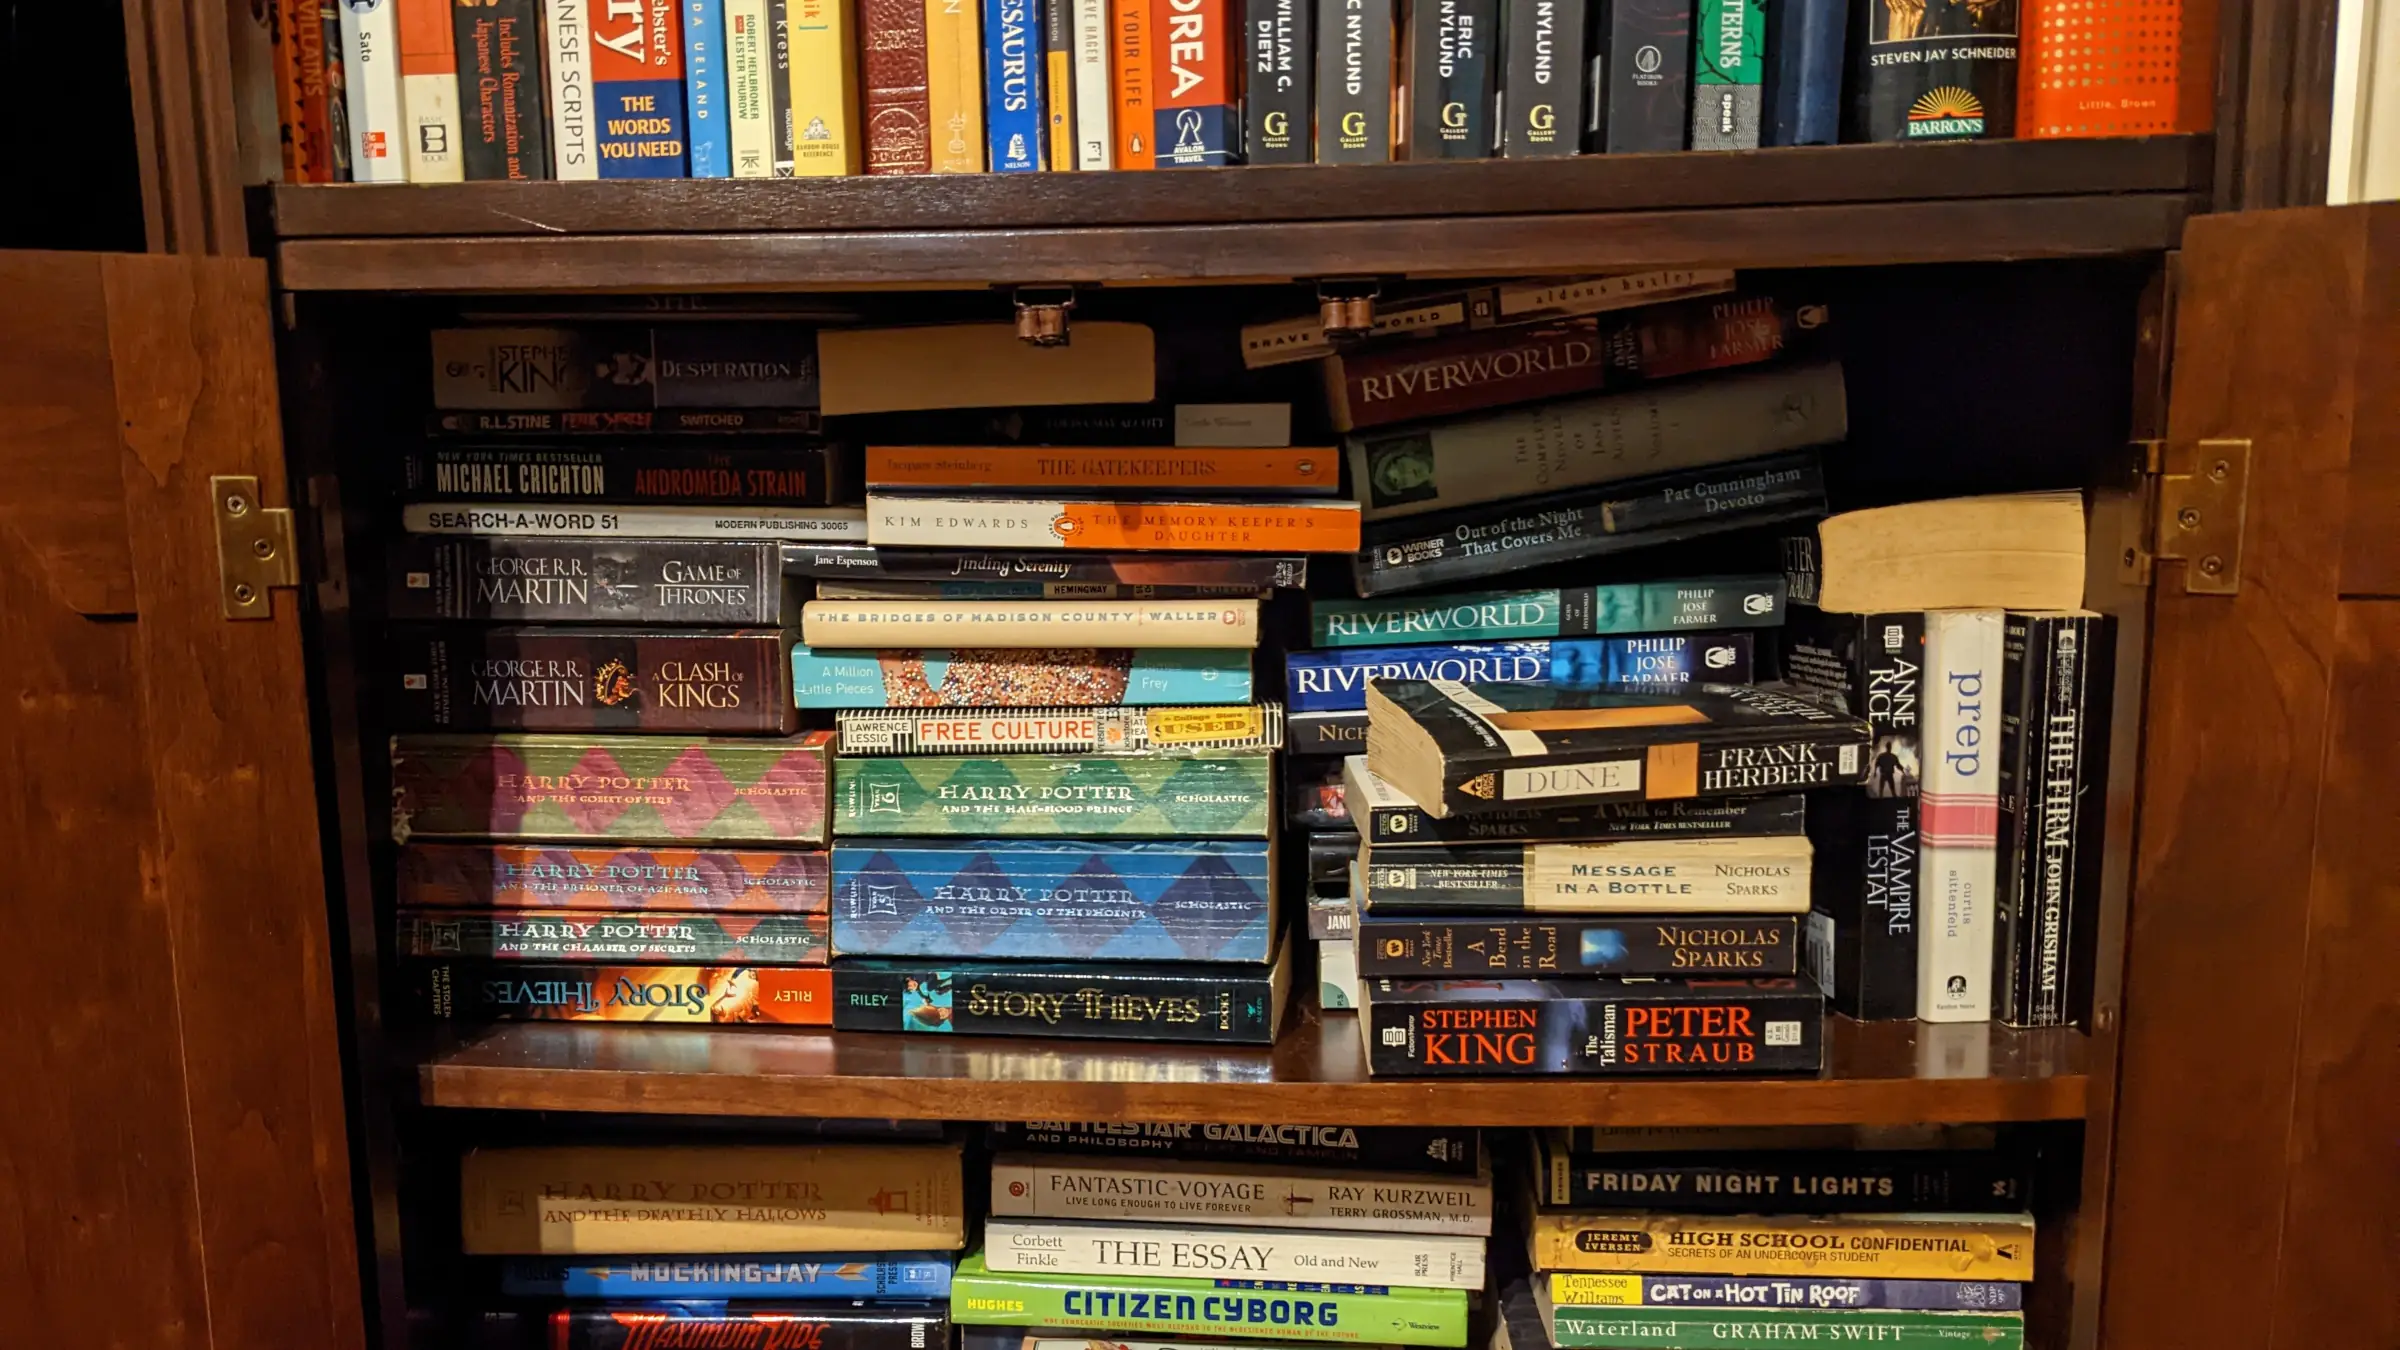 Part of a bookshelf with a variety of books stacked on it.